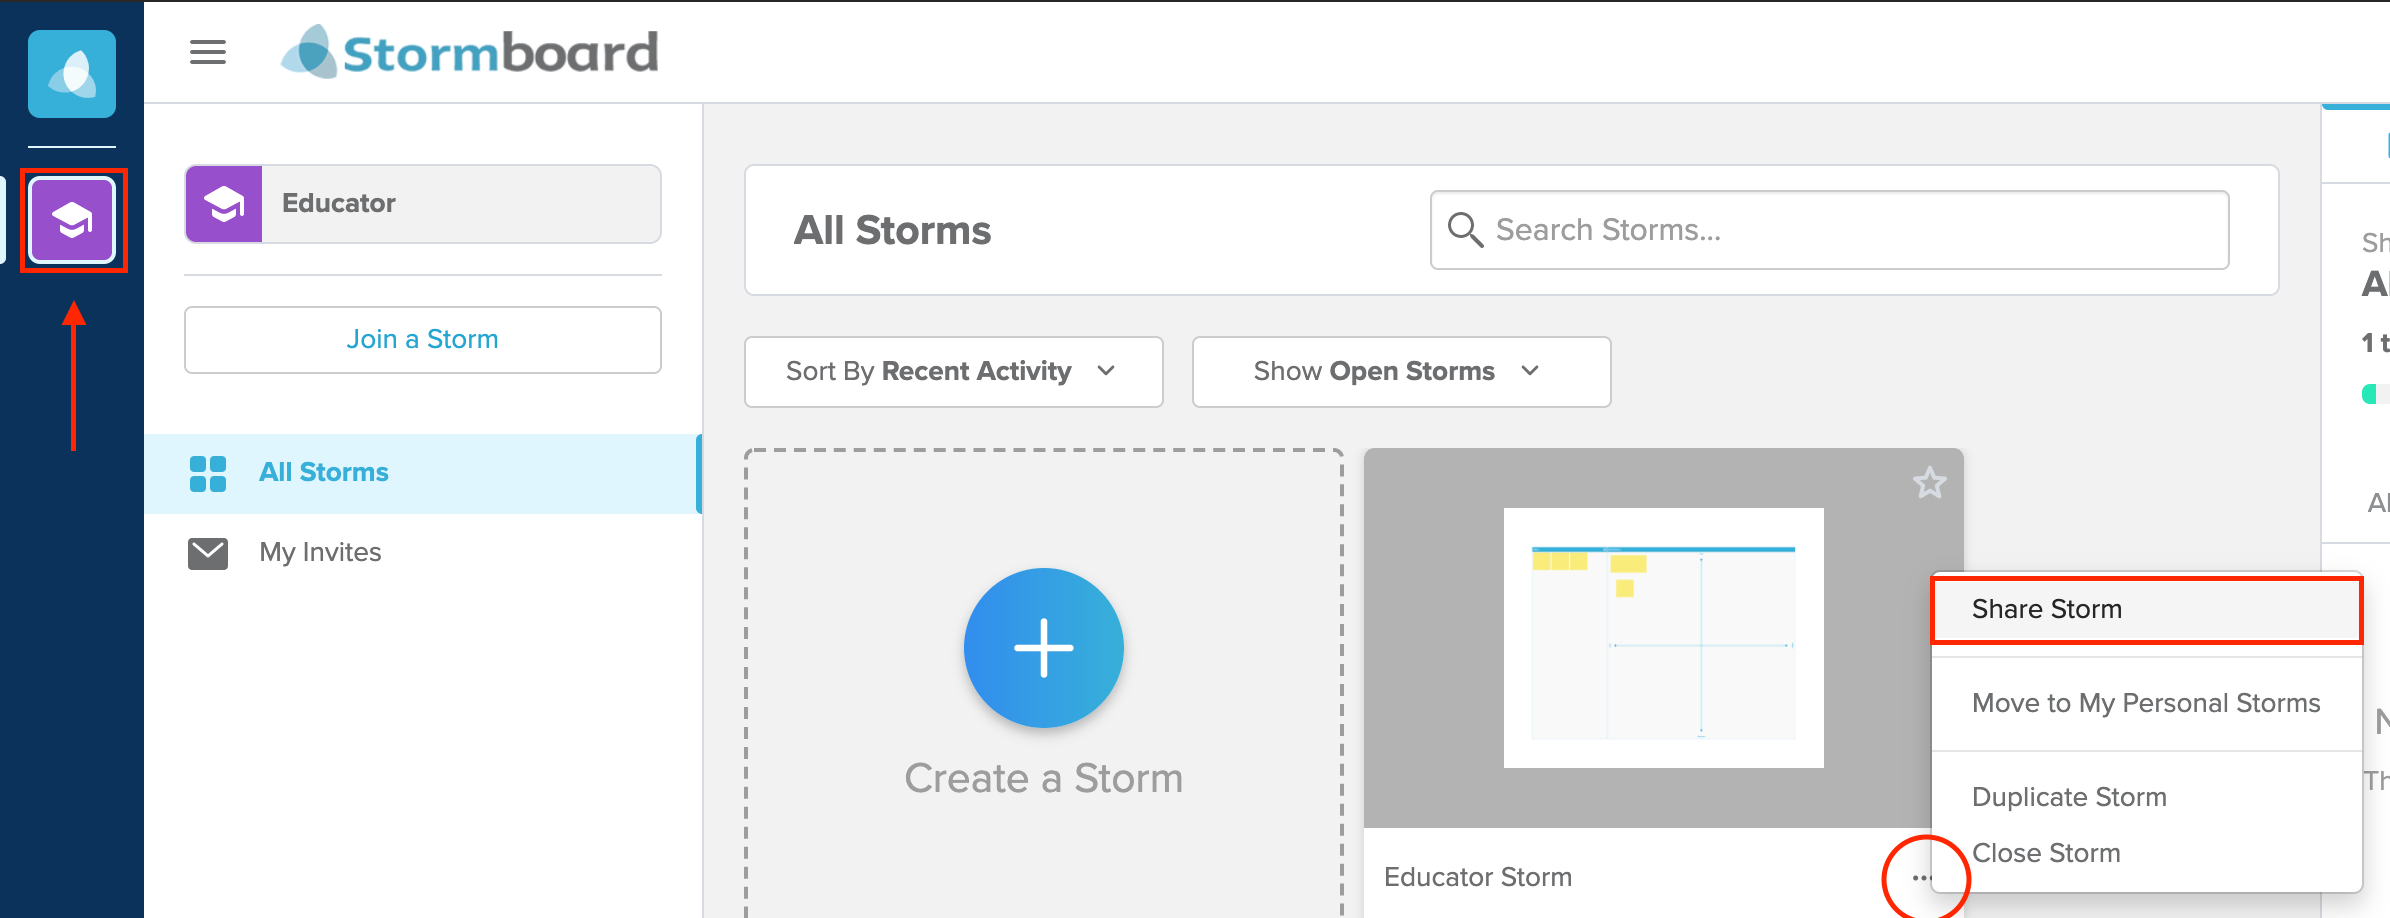 Demonstrating how to share or invite people to your storm from the dashboard